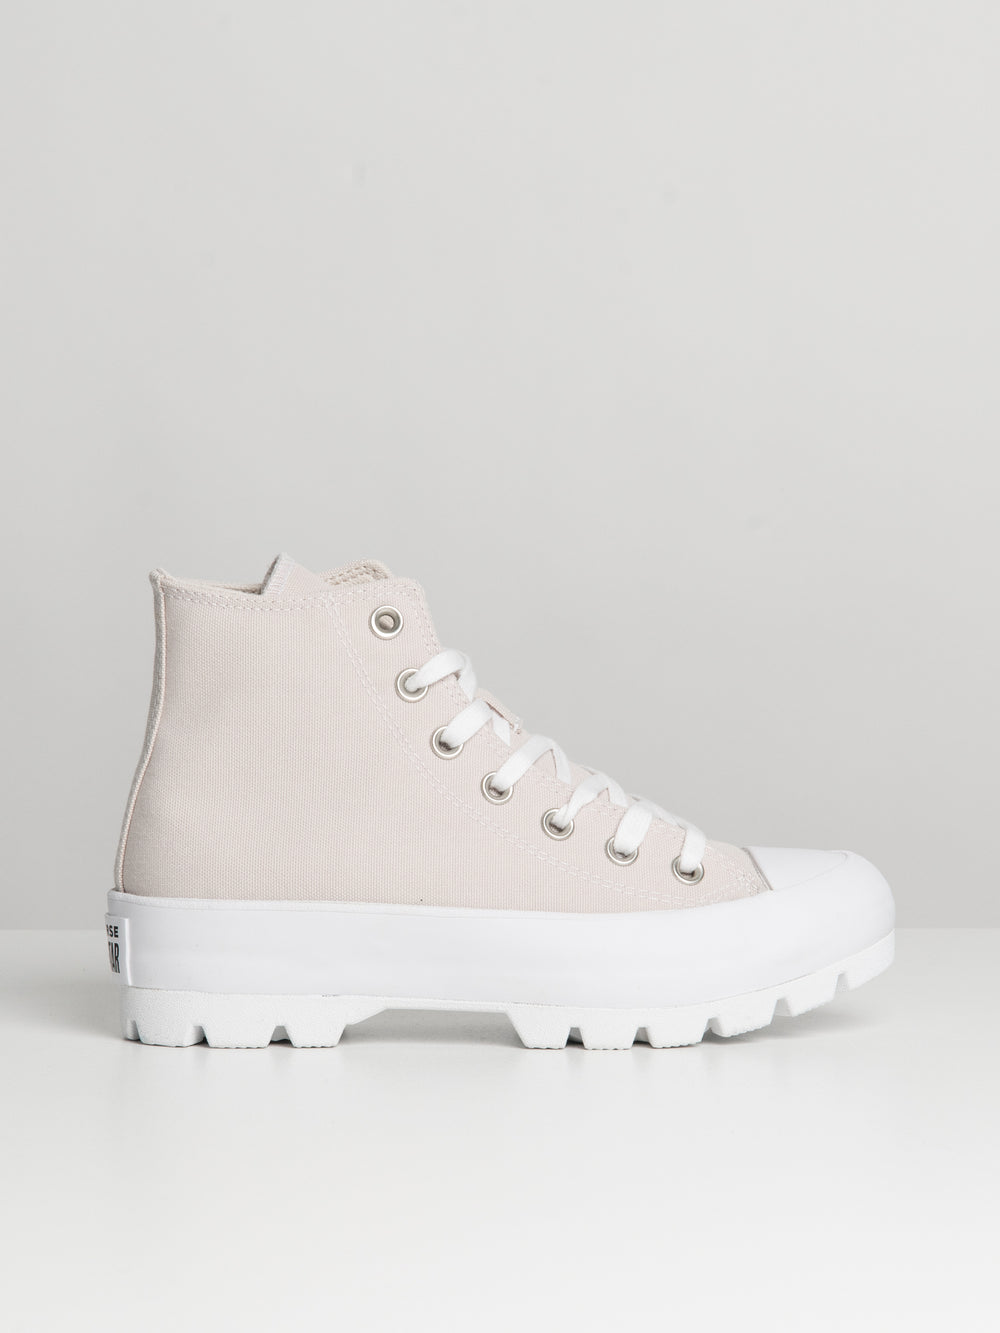 WOMENS CONVERSE CHUCK TAYLOR LUGGED HI SNEAKER - CLEARANCE